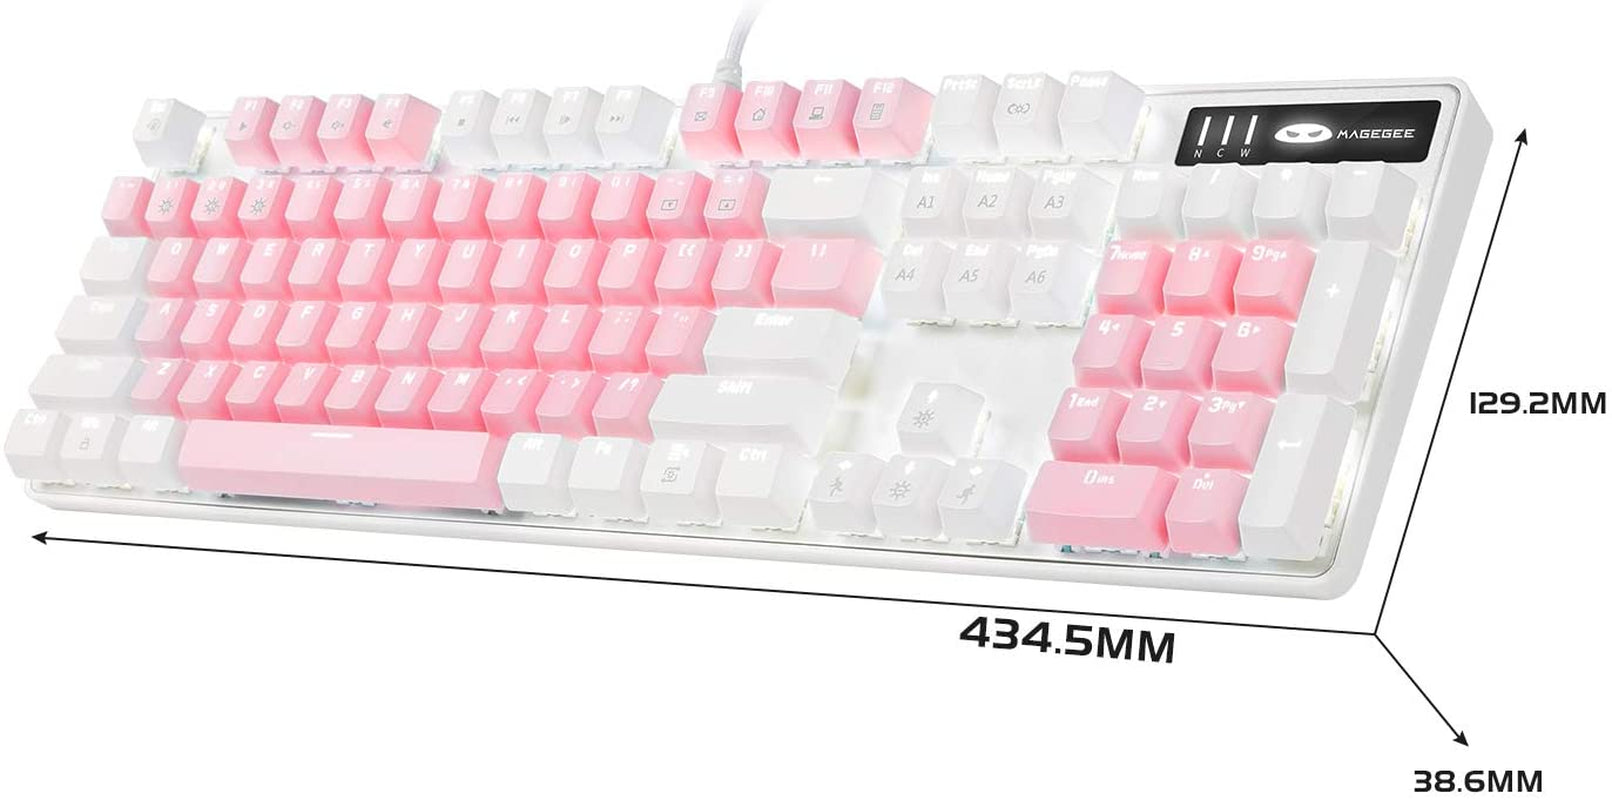 Mechanical Gaming Keyboard, New Upgraded Blue Switch 104 Keys White Backlit Keyboards, USB Wired Mechanical Computer Keyboard for Laptop, Desktop, PC Gamers(White & Pink)